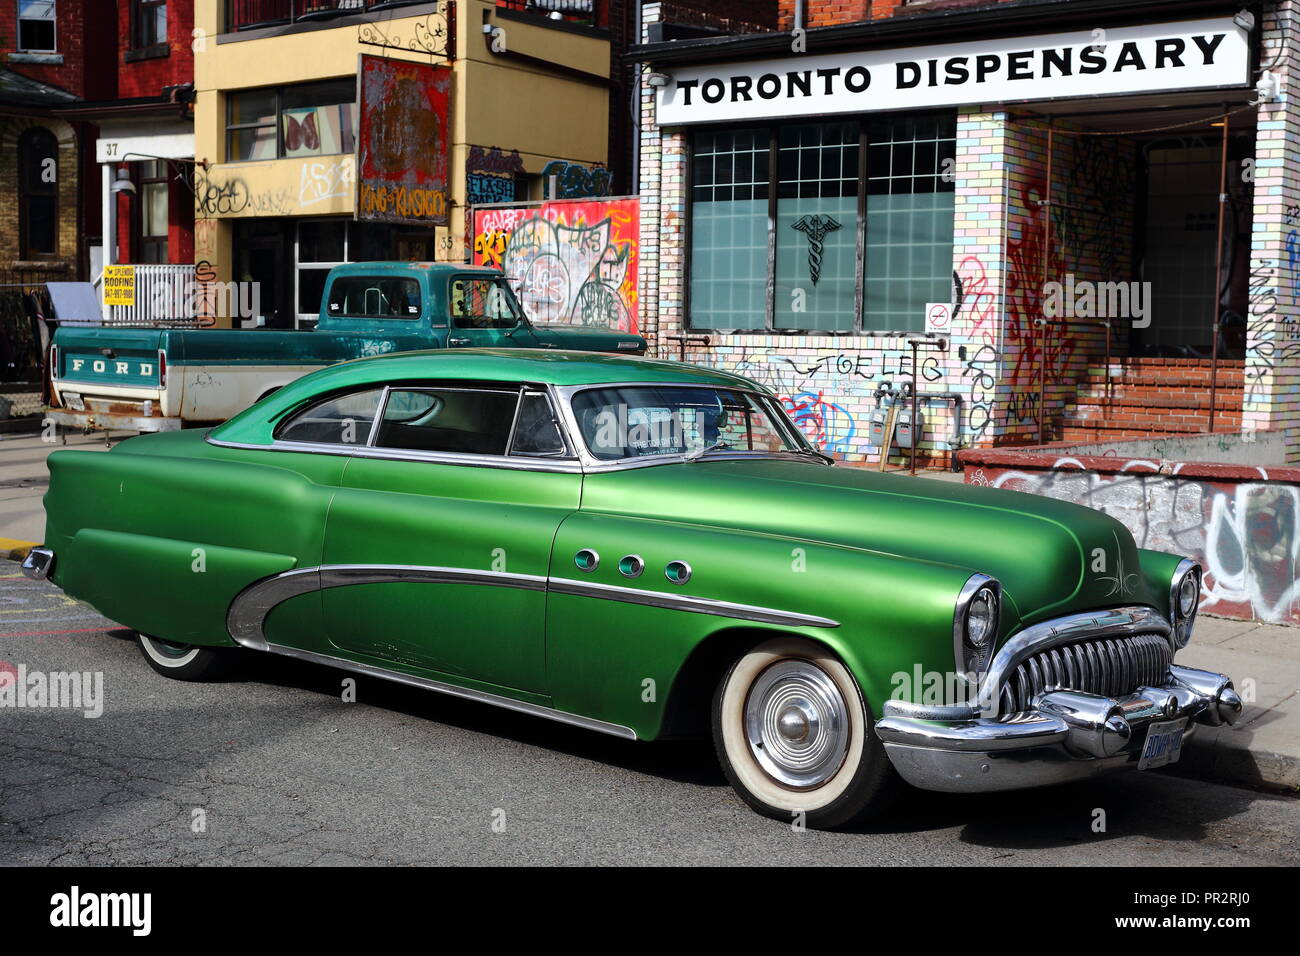 Green Buick Super parked in front of the Toronto Dispensary at Kensington Market, Toronto, CA. Stock Photo